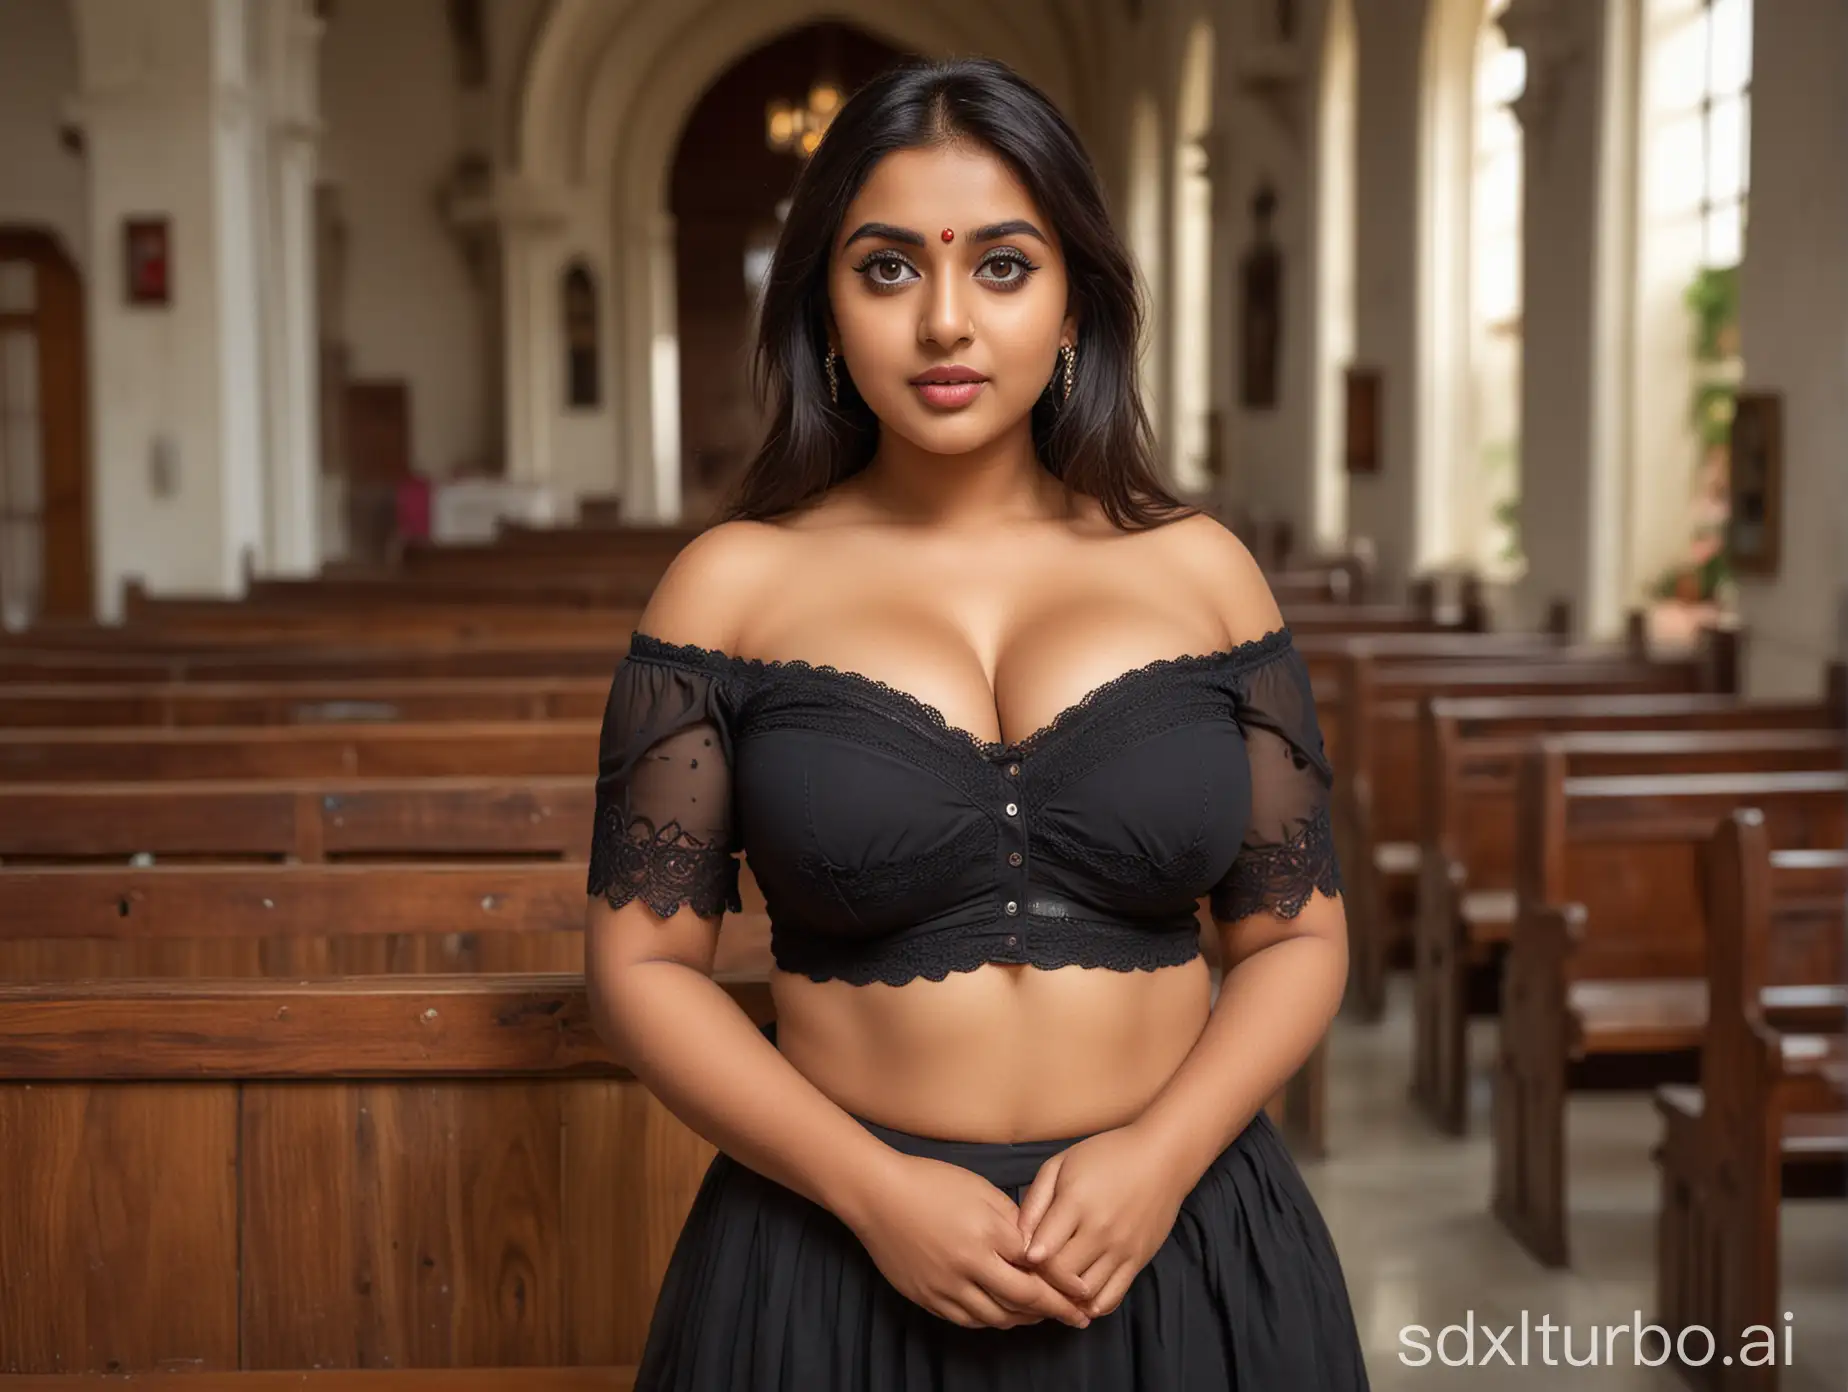 Curvy-Indian-Woman-Embracing-Family-in-Church